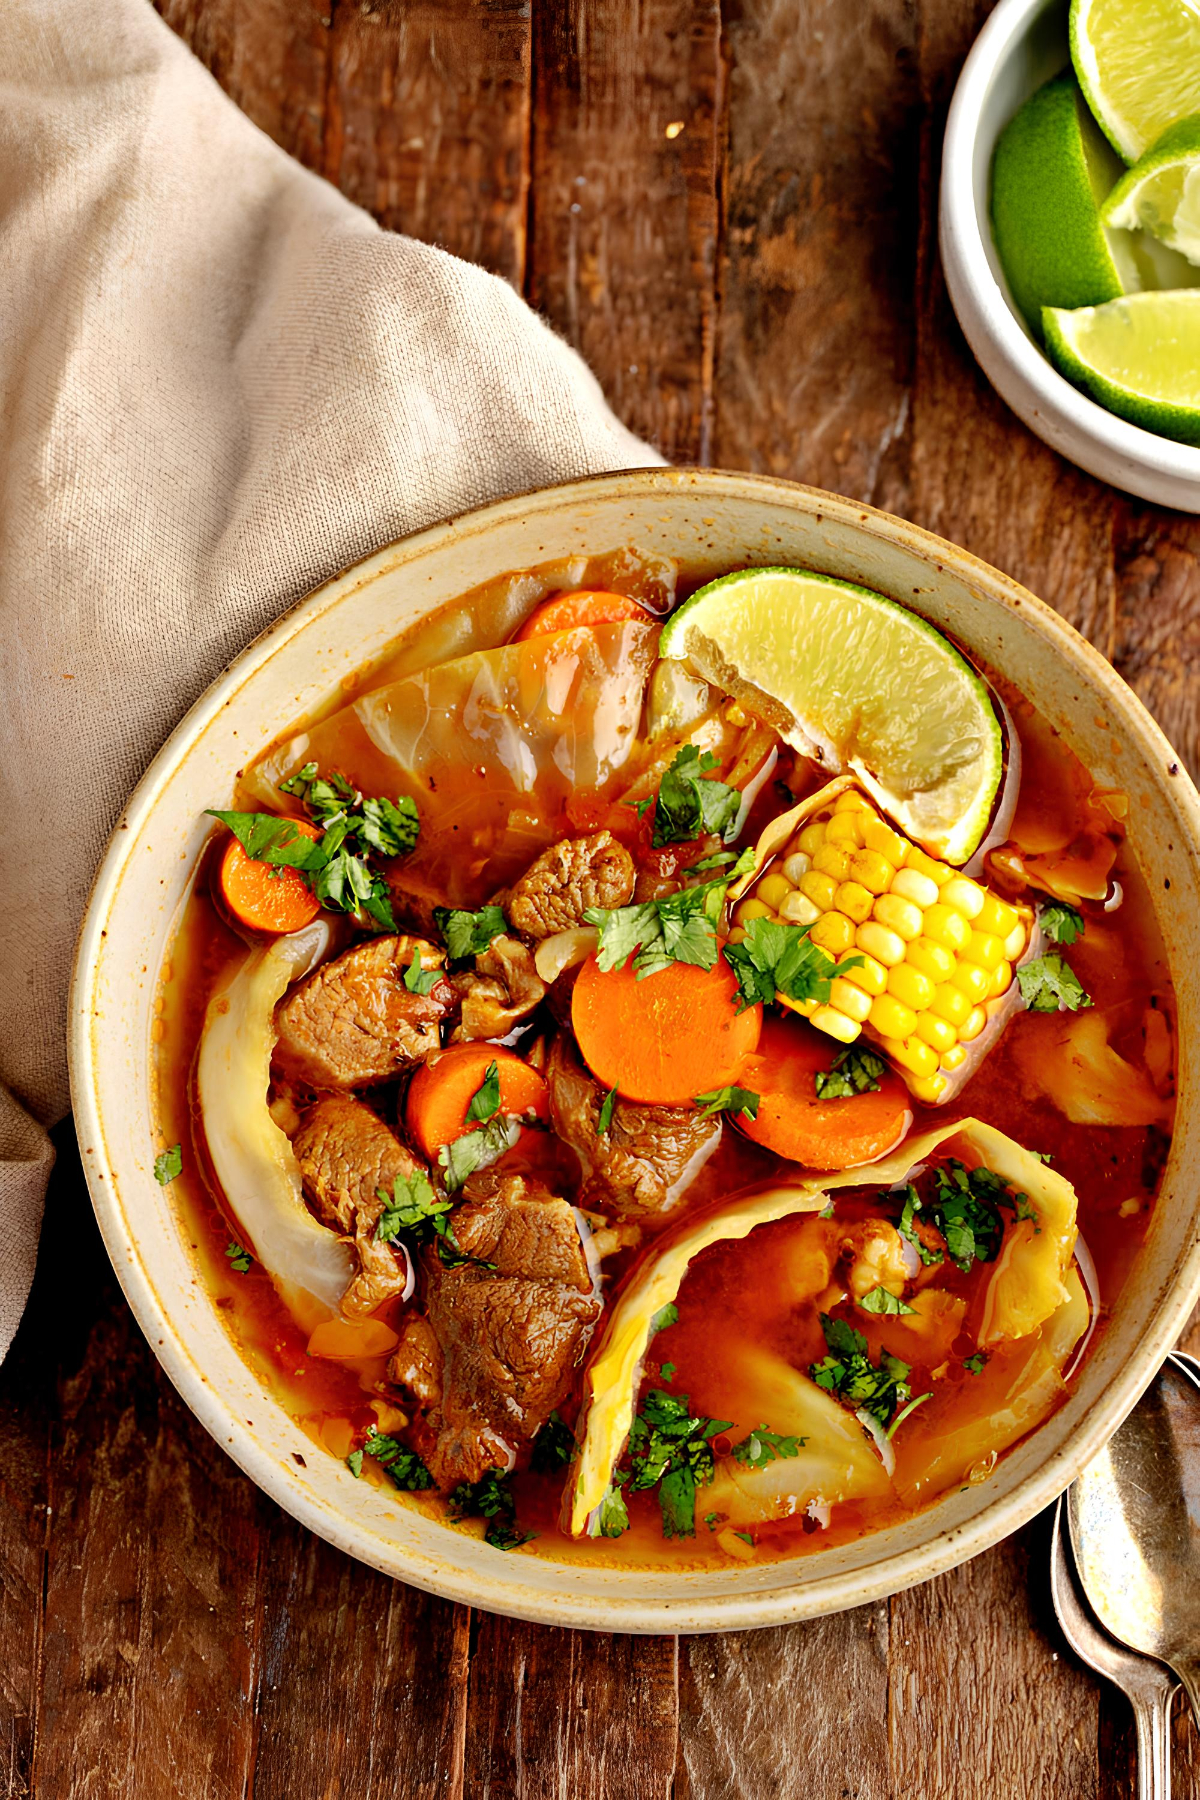 Bowl of Warm Caldo de Res with Bone-in Beef Shank, Vegetable Oil, Salt and Black Pepper, Beef Broth and Garnishes